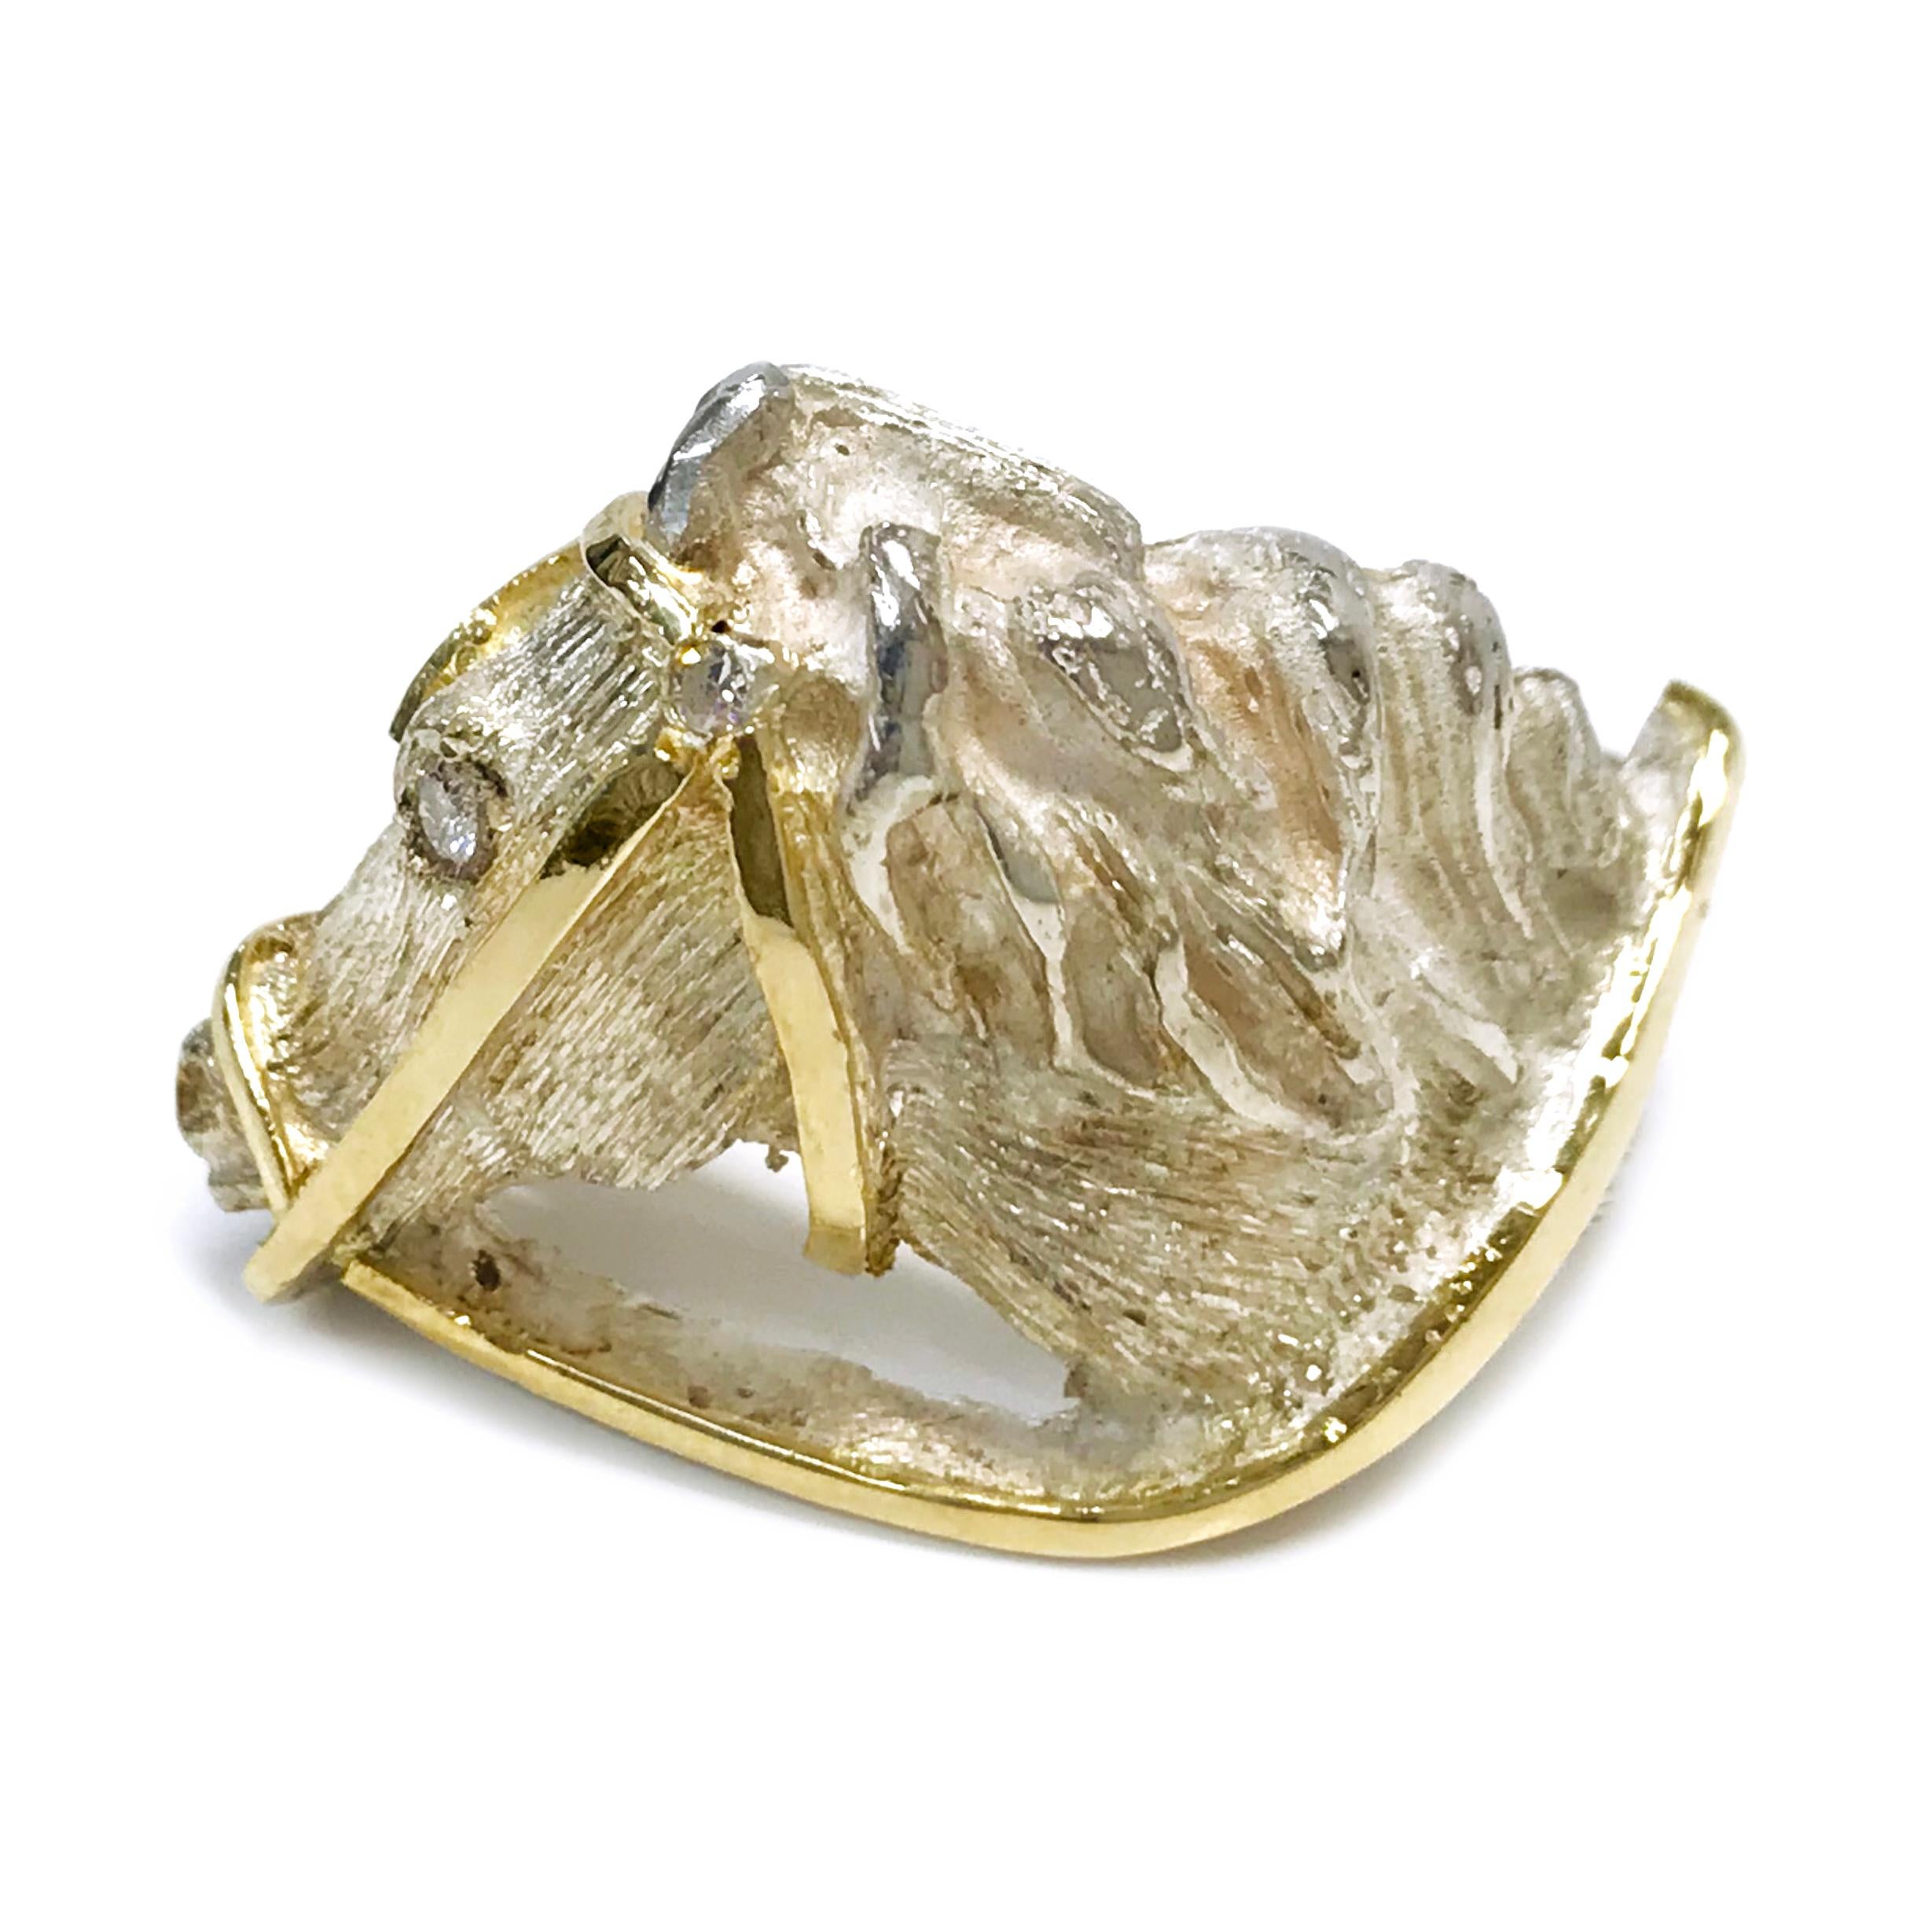 Two-Tone 18 Karat Yellow Gold and Sterling Silver Horse Head Ring. Hand-carved horse head with a textured finish and smooth gold reins. This ring would be perfect for an equestrian lover or any person that appreciates these majestic animals and